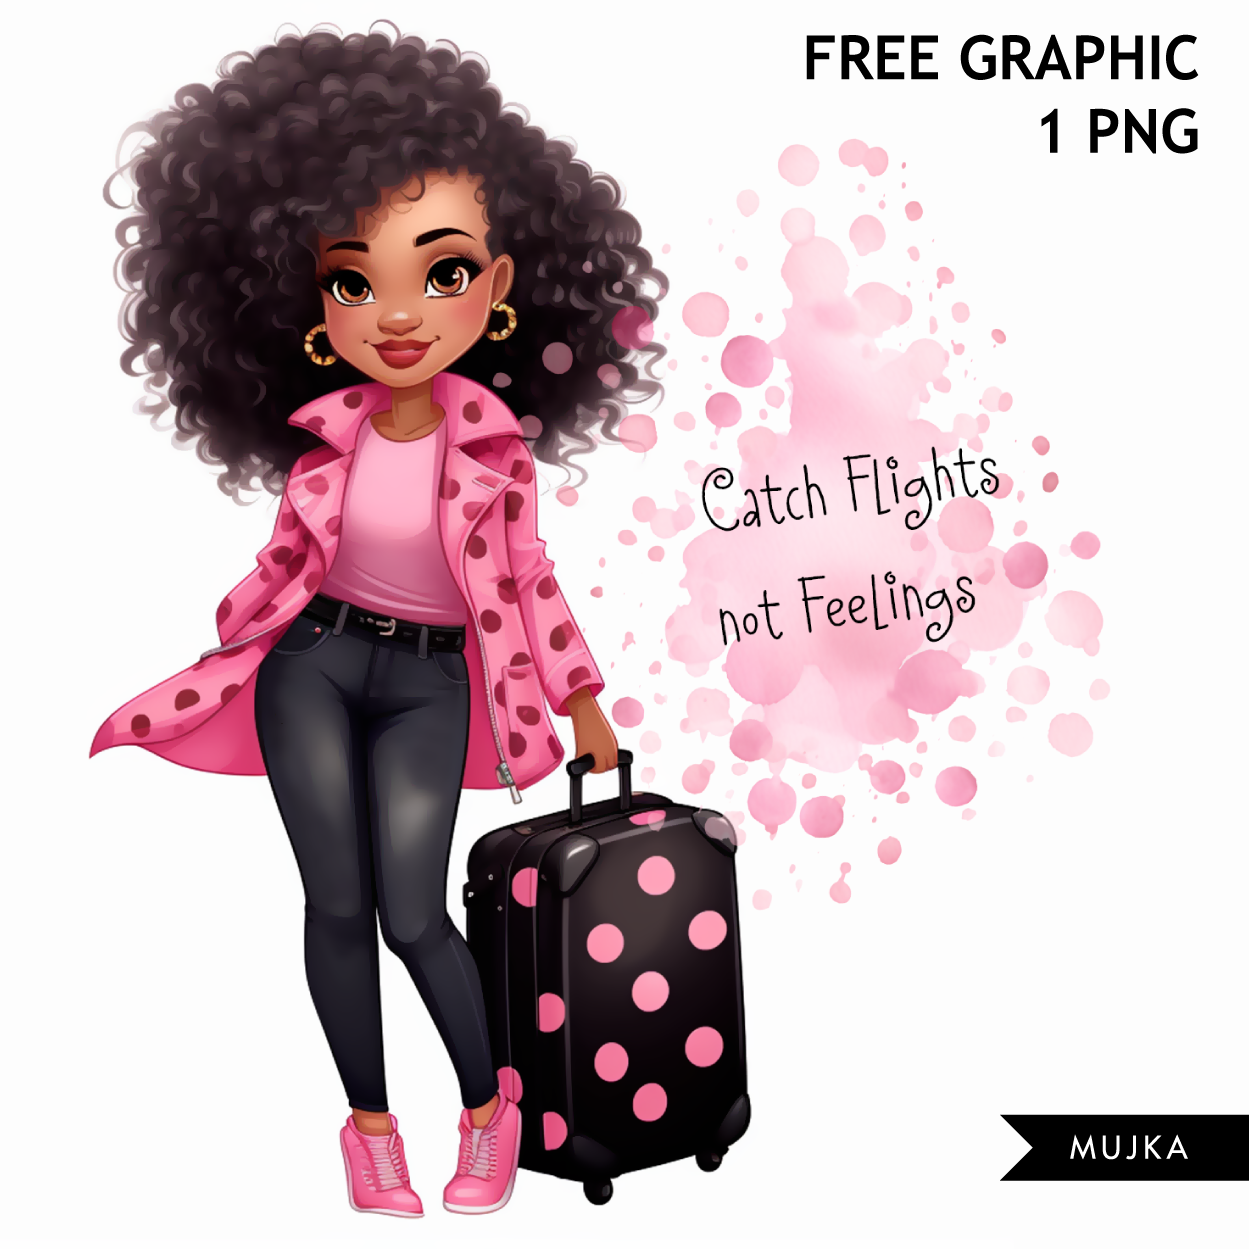 Free traveling Black woman Png graphic, vacation graphics, free travel card